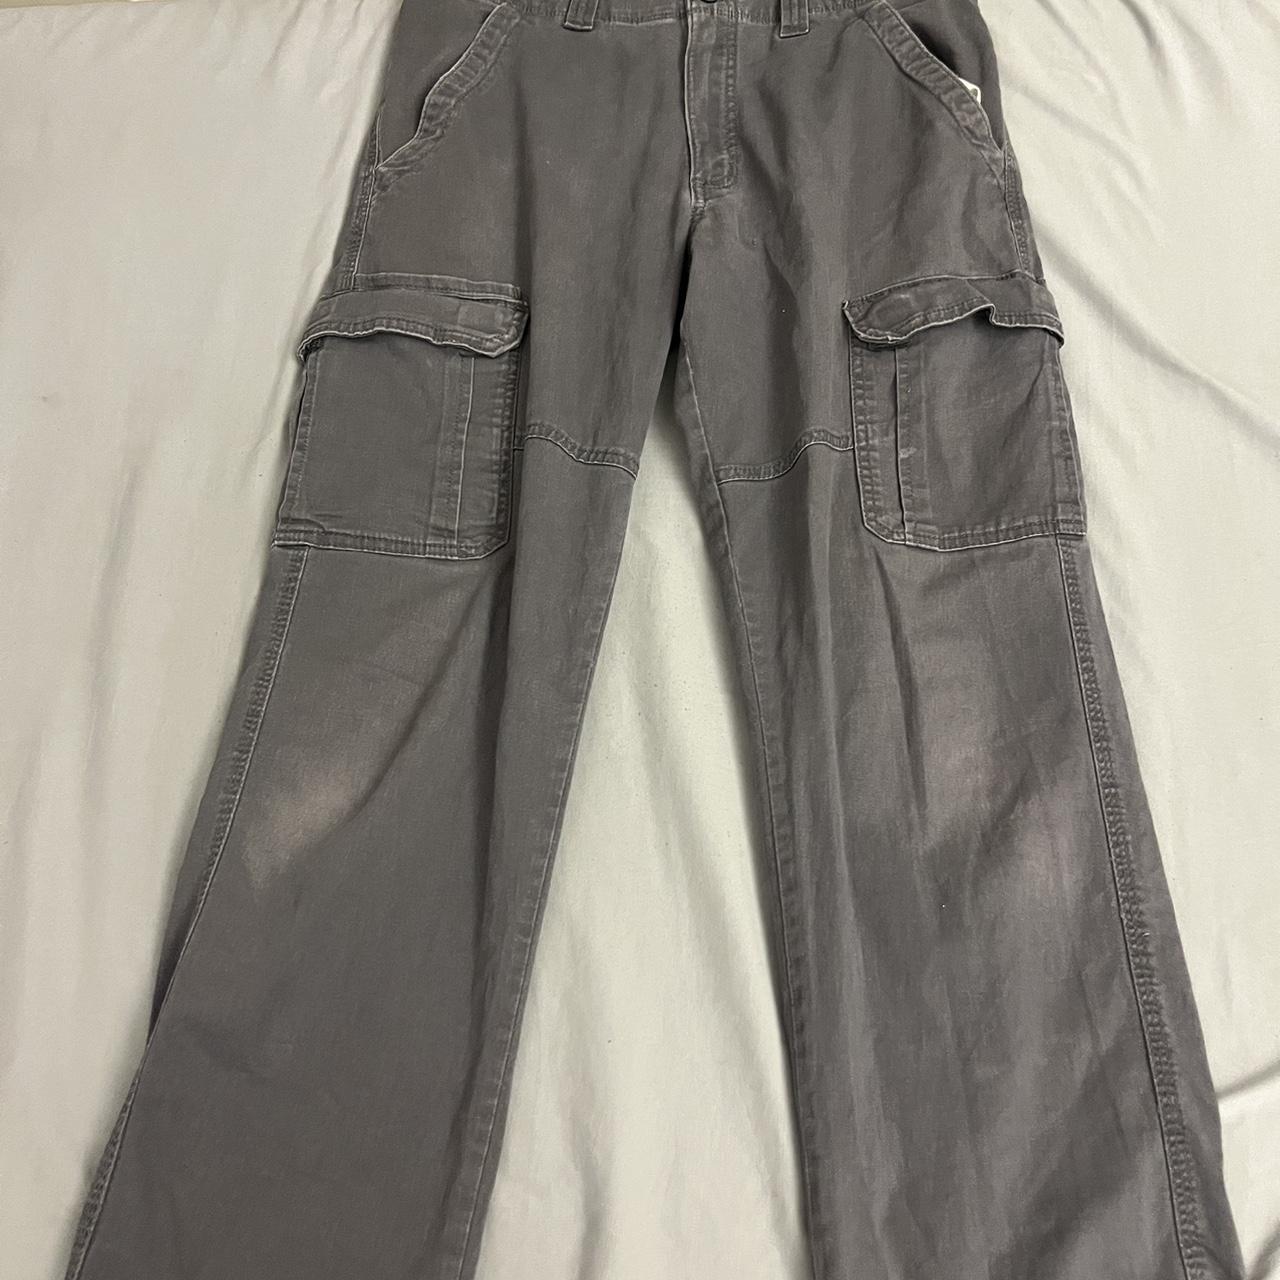 Wrangler Men's Grey and Silver Trousers (2)